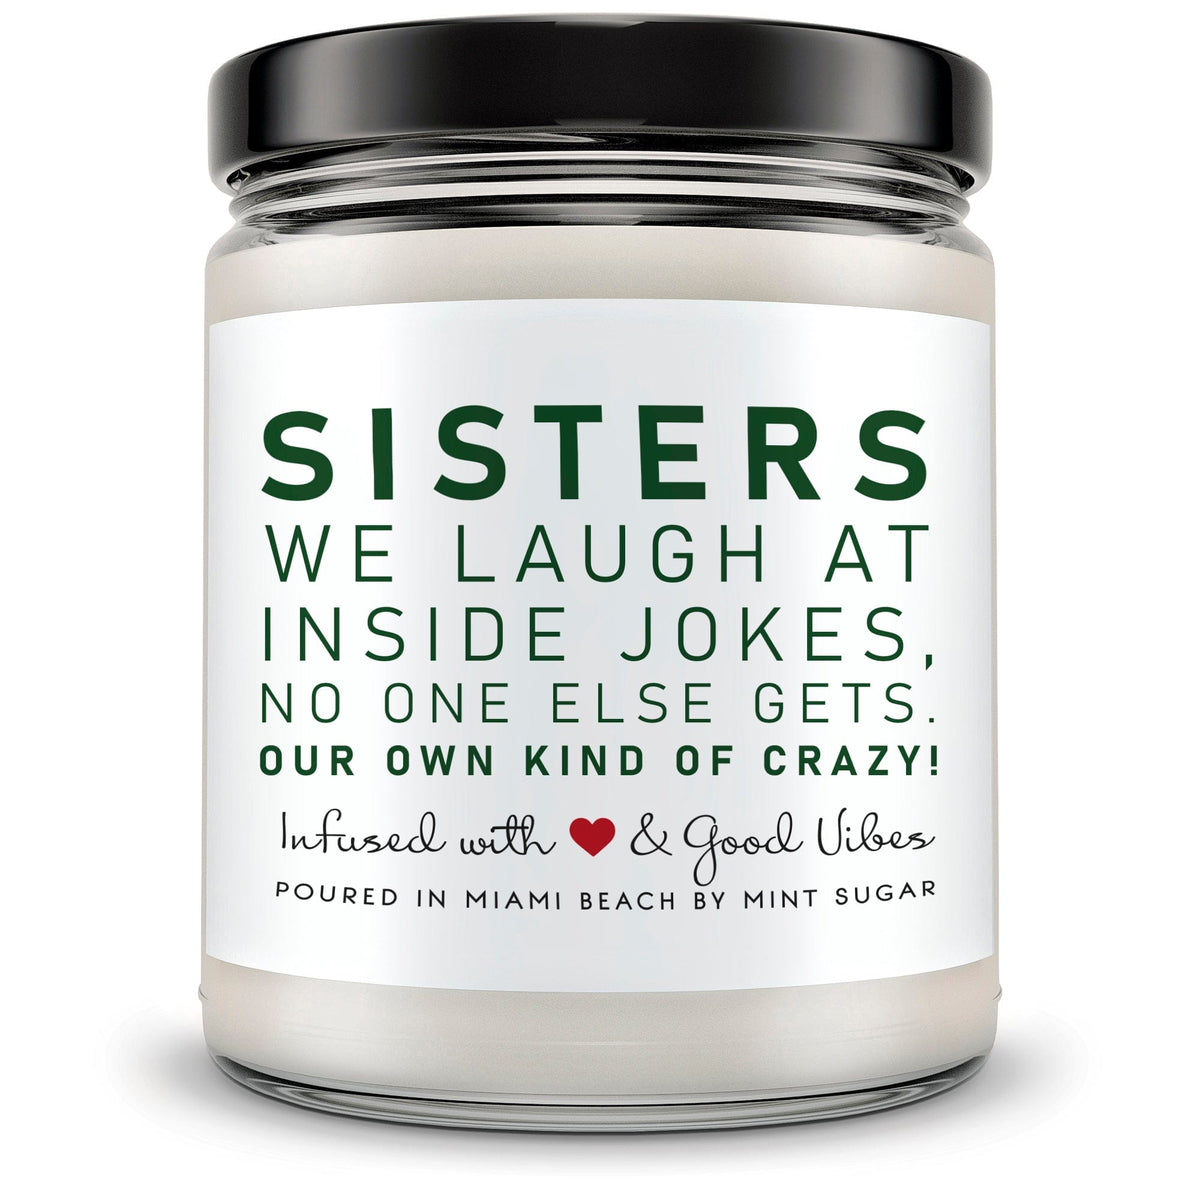 Sisters We Laugh at Inside Jokes, No One Else Gets. Our Own Kind of Crazy - Mint Sugar Candle